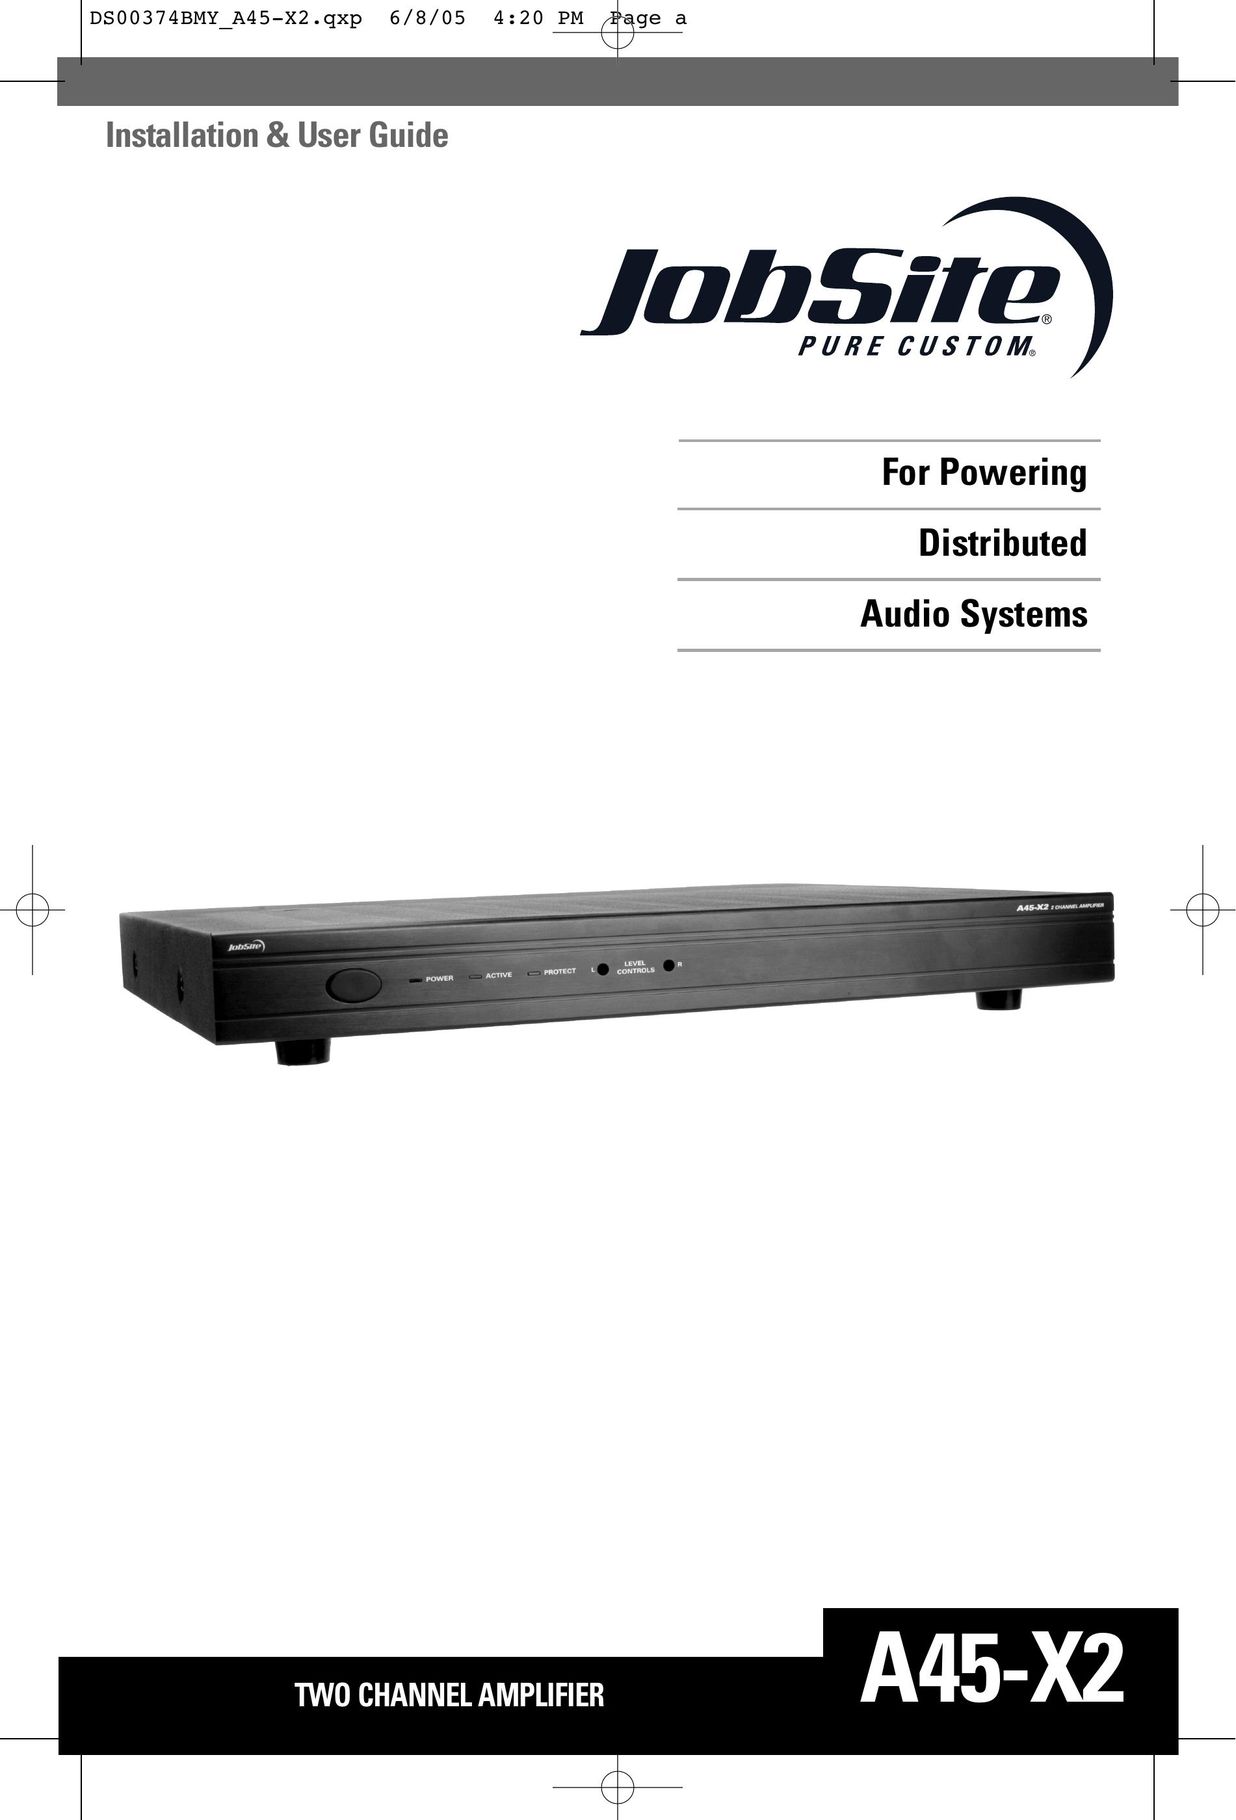 JobSite Systems A45-X2 Stereo Amplifier User Manual